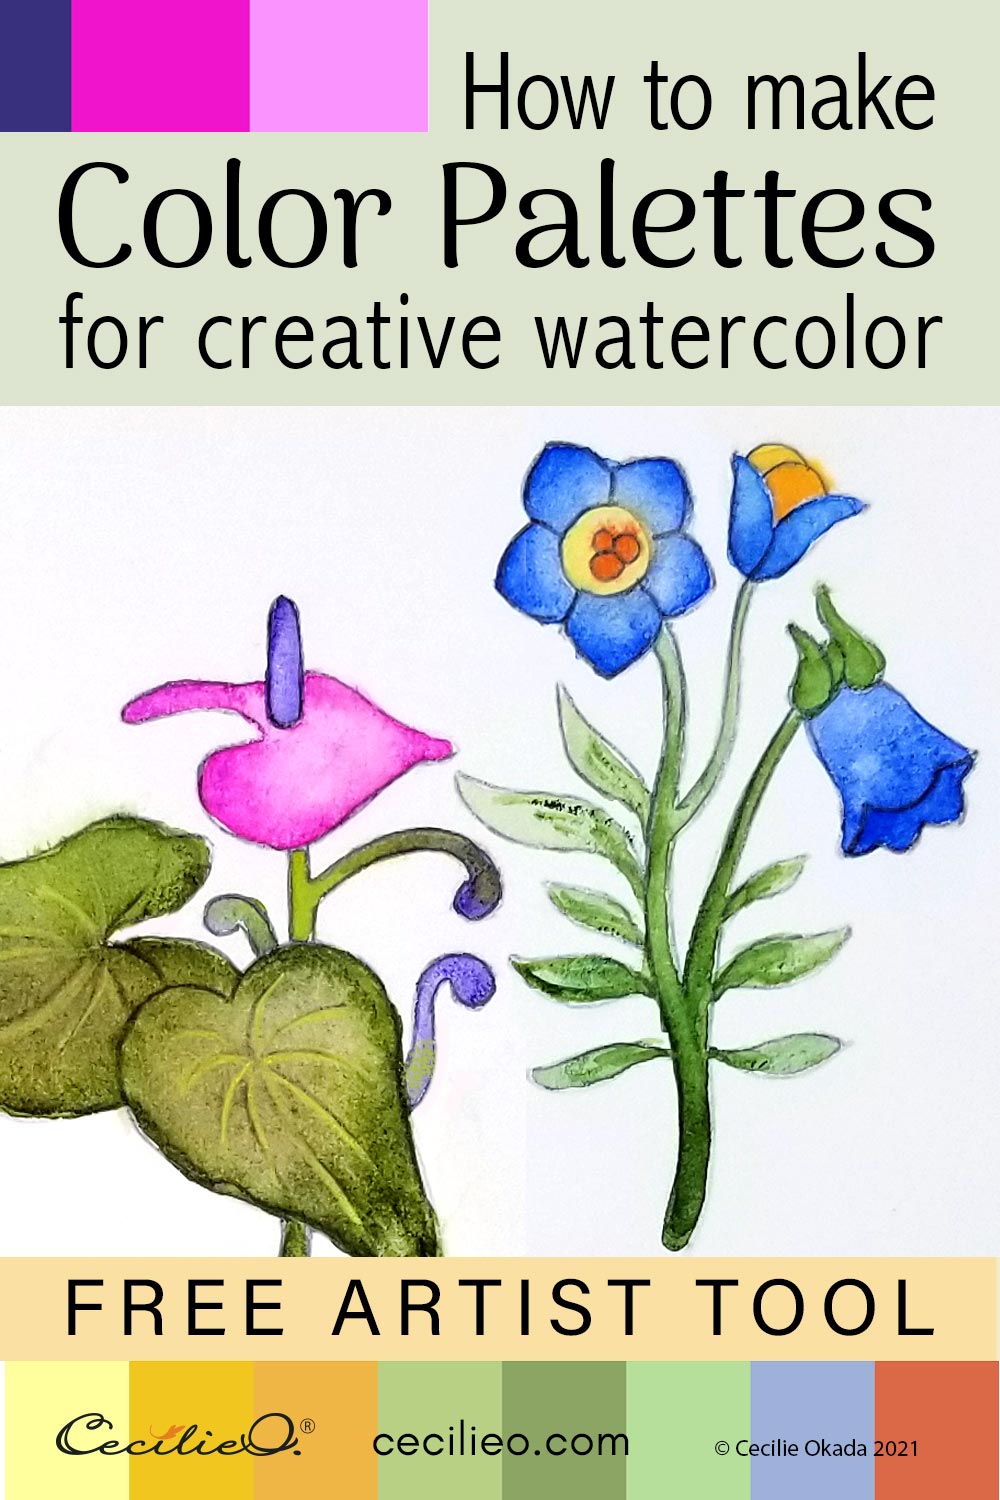 flower drawings with color easy